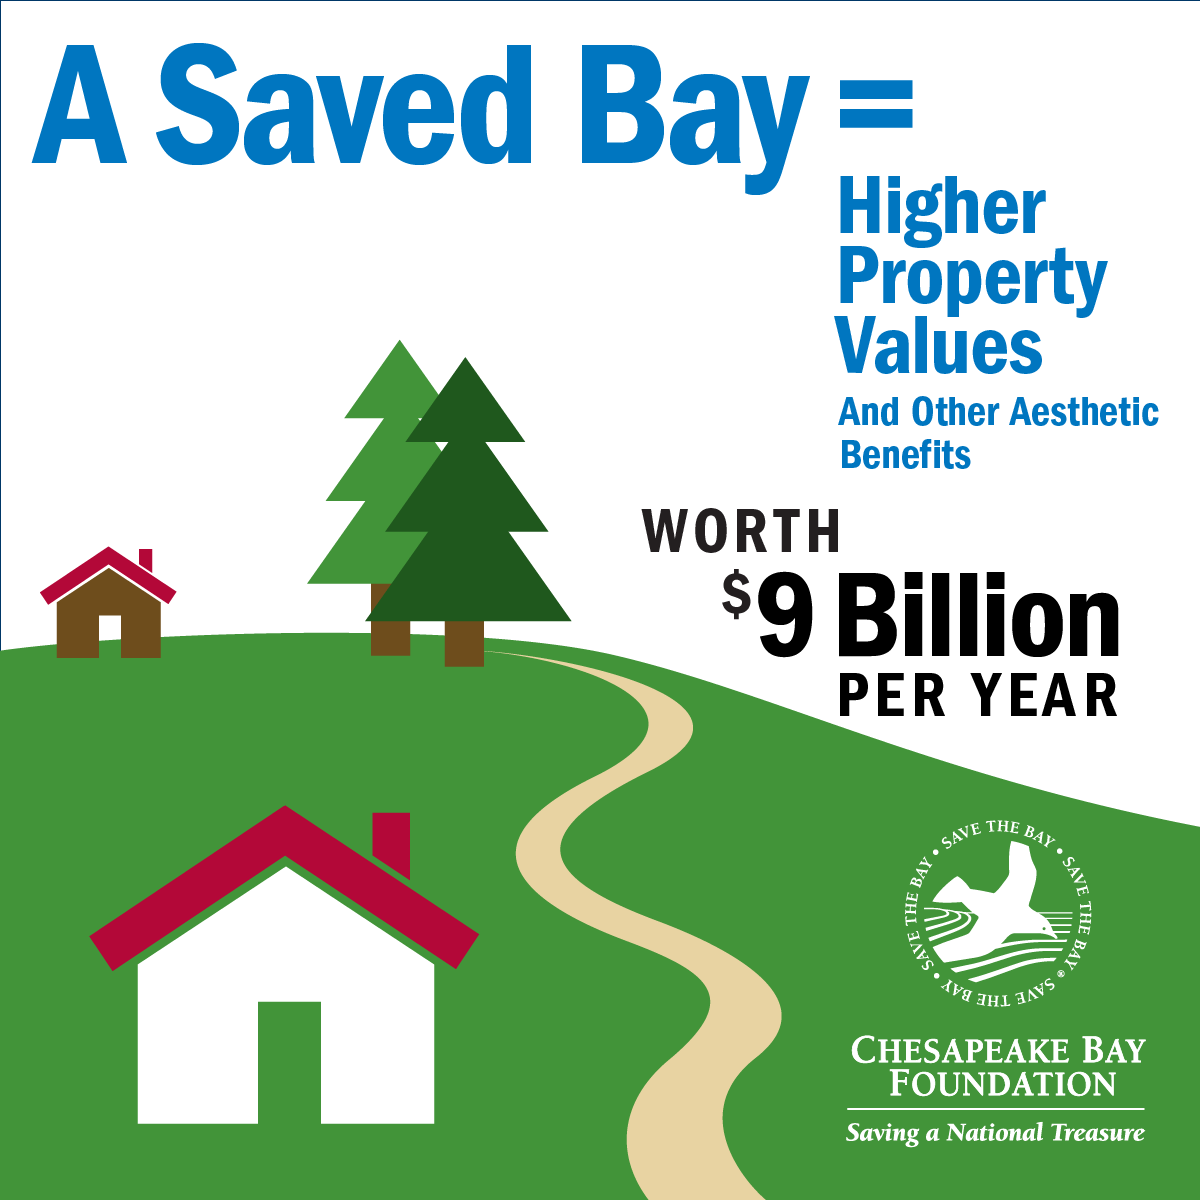 A Saved Bay = Higher Property Values worth $9 Billion per year